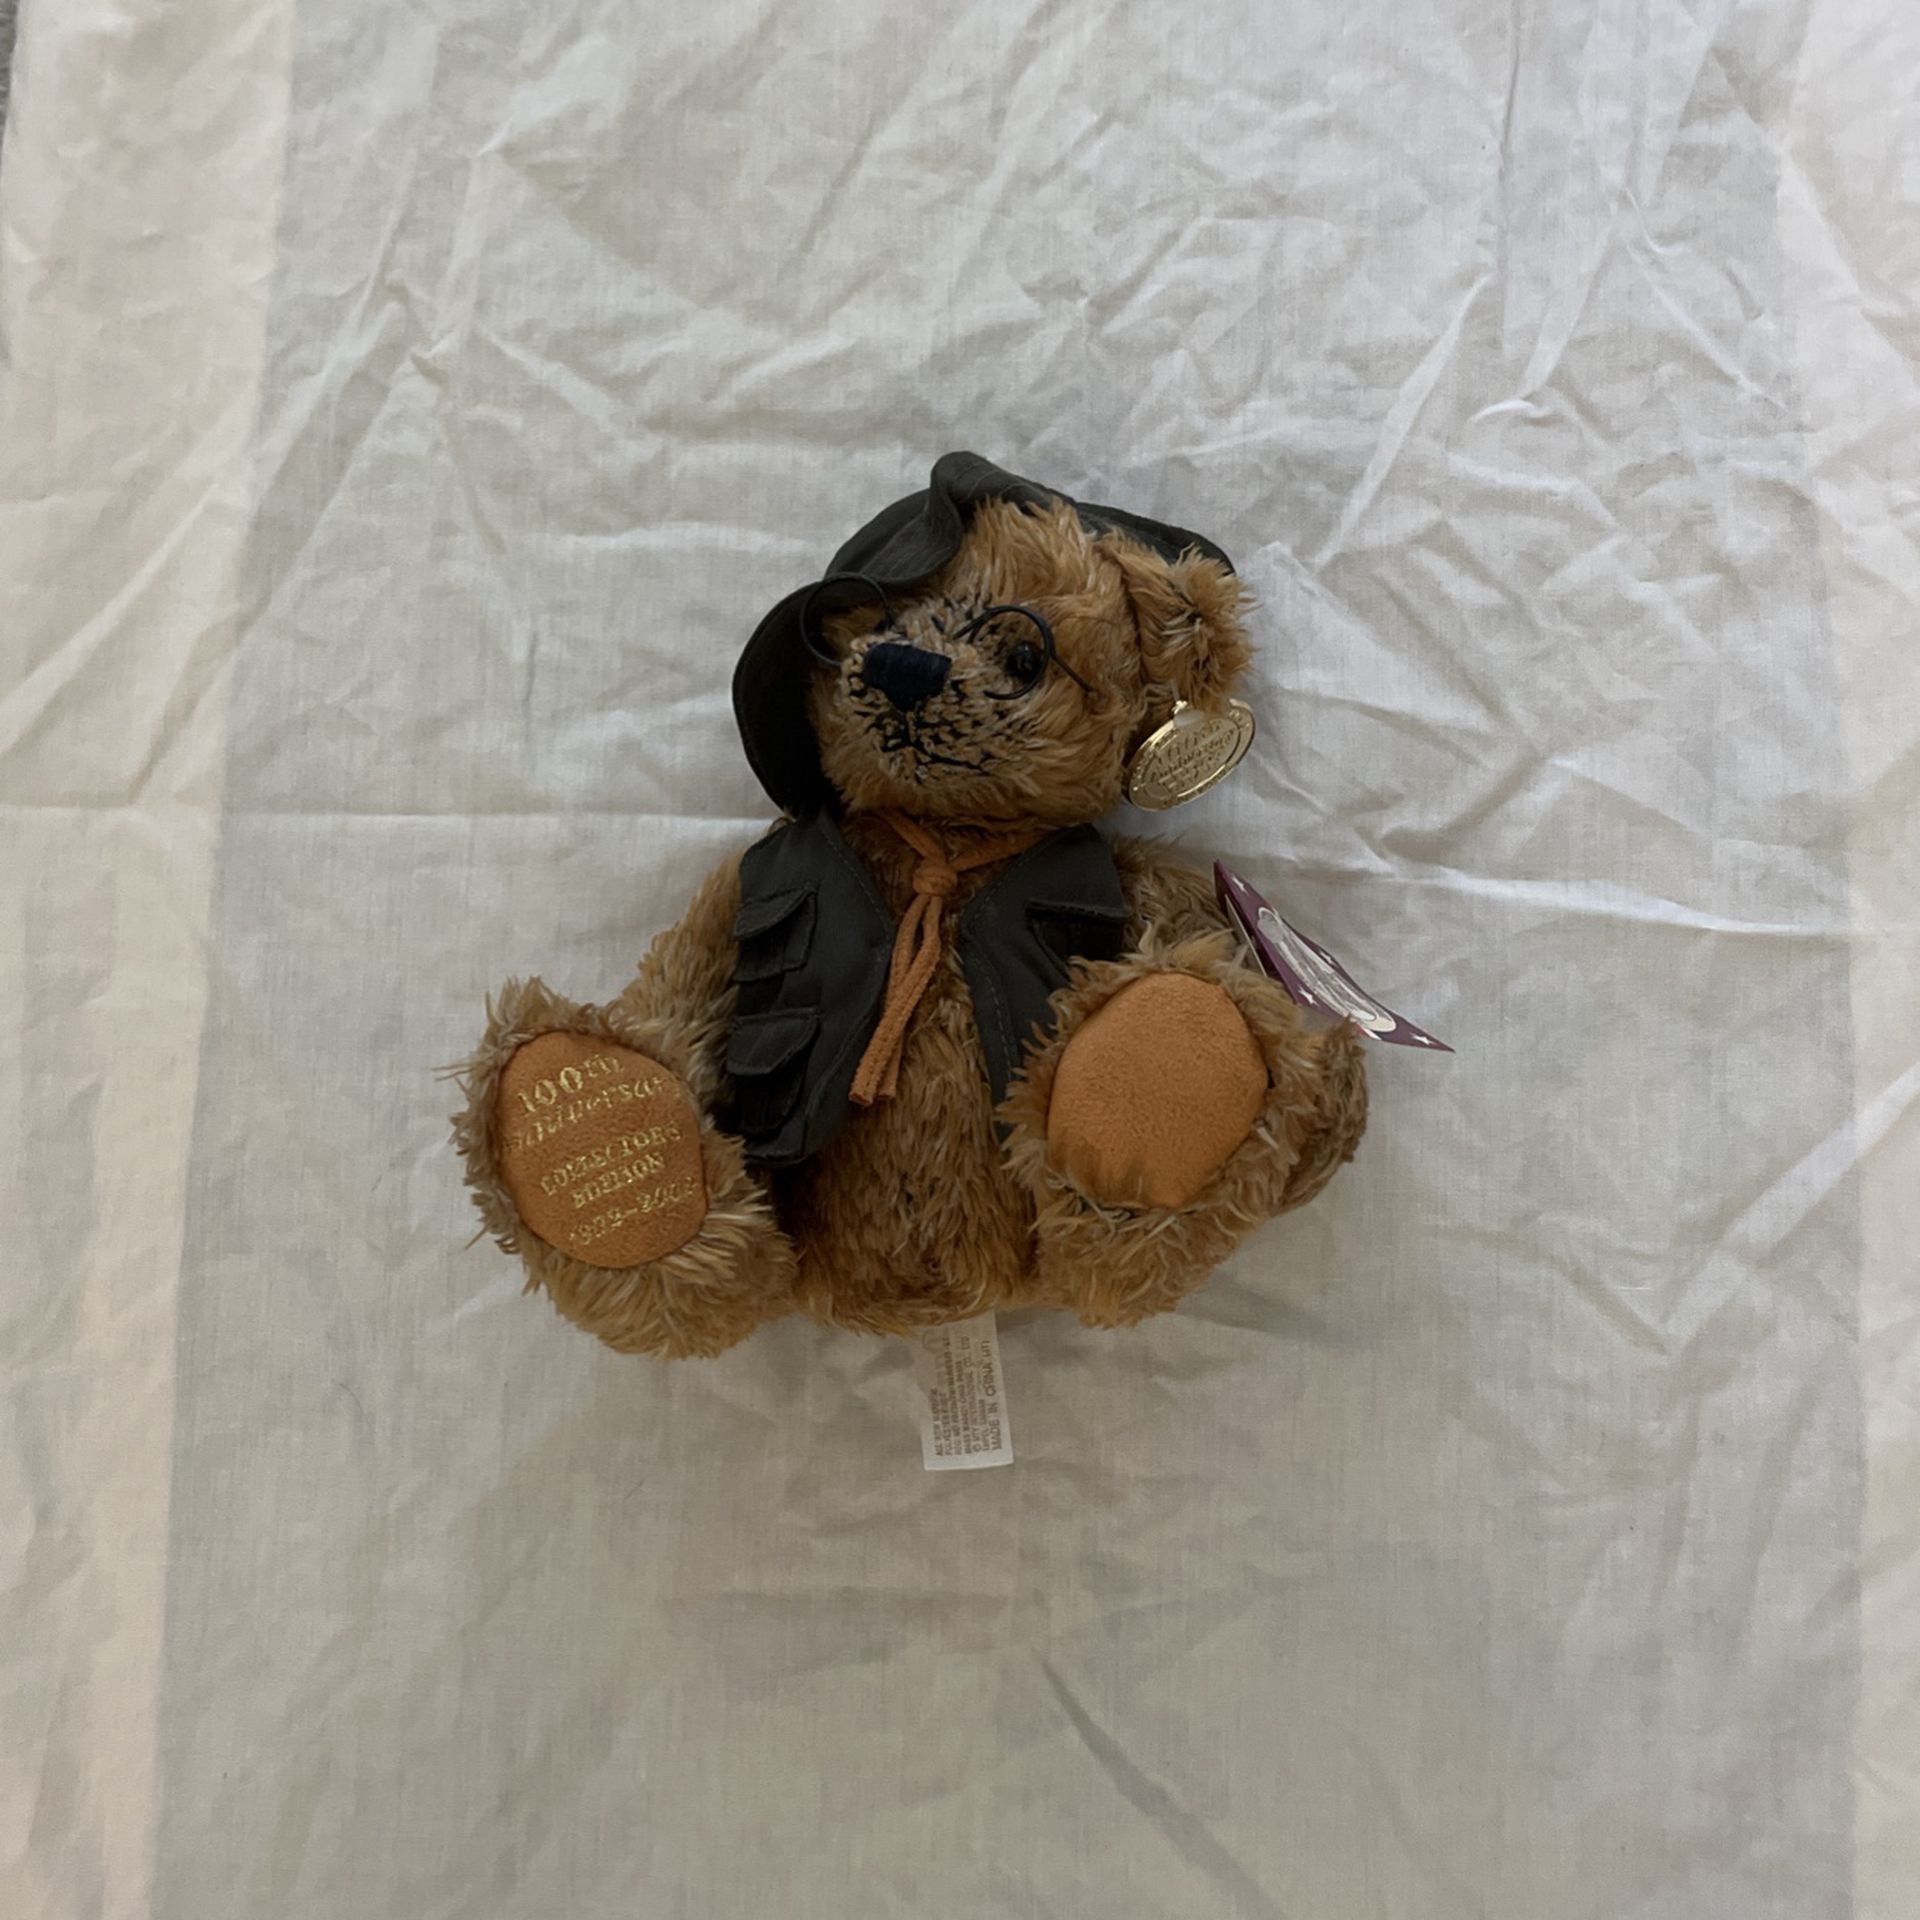 Collectors Edition 100th Anniversary Teddy Bear 1(contact info removed)